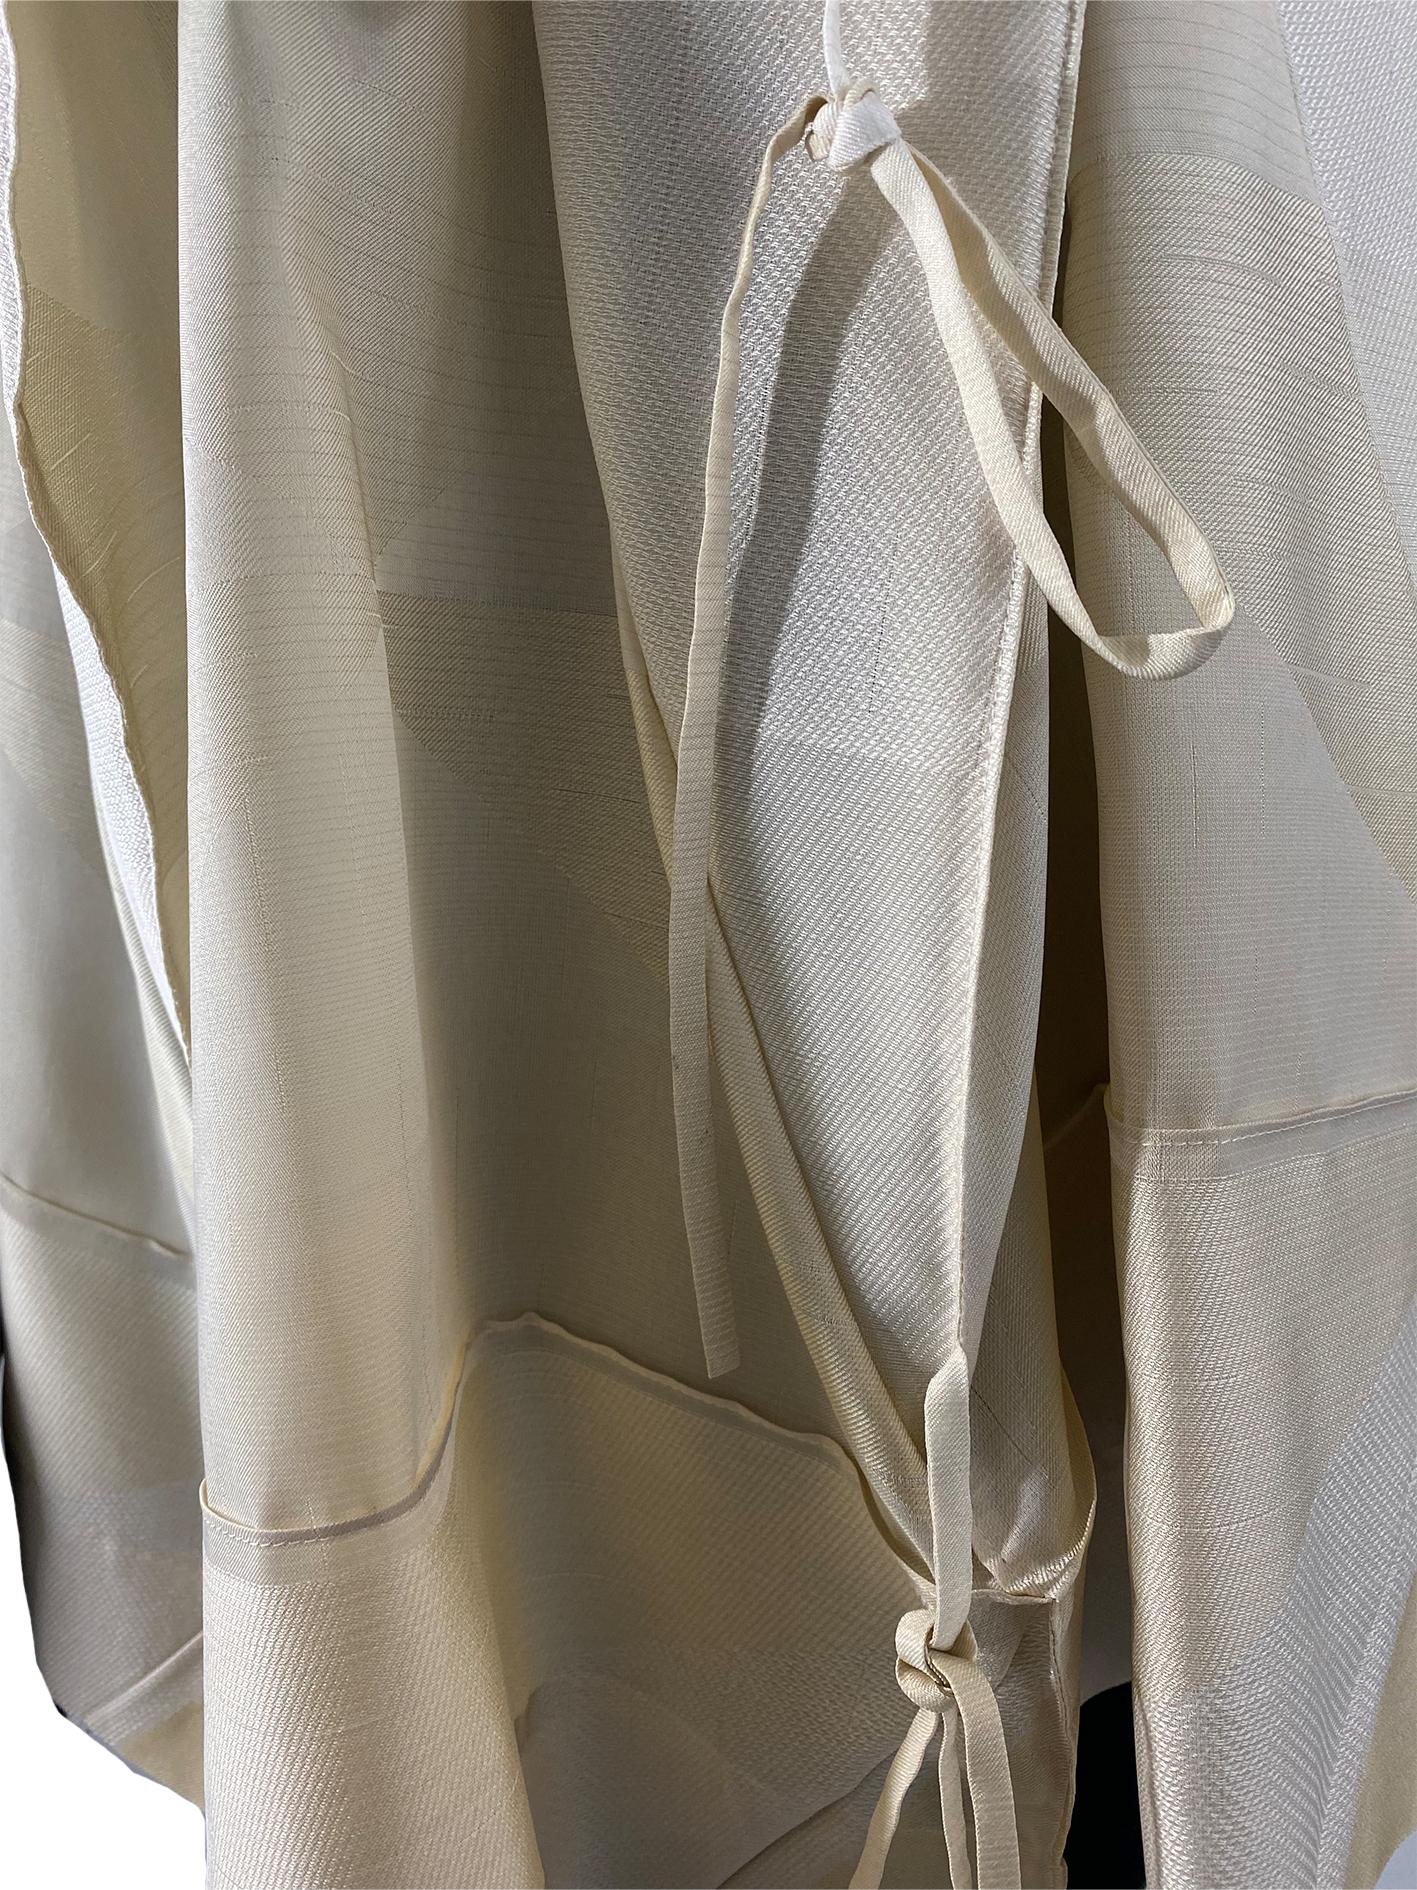 1990’s Issey Miyake Oatmeal, Cream And Off-White Silk Mixture Top In Good Condition For Sale In London, GB